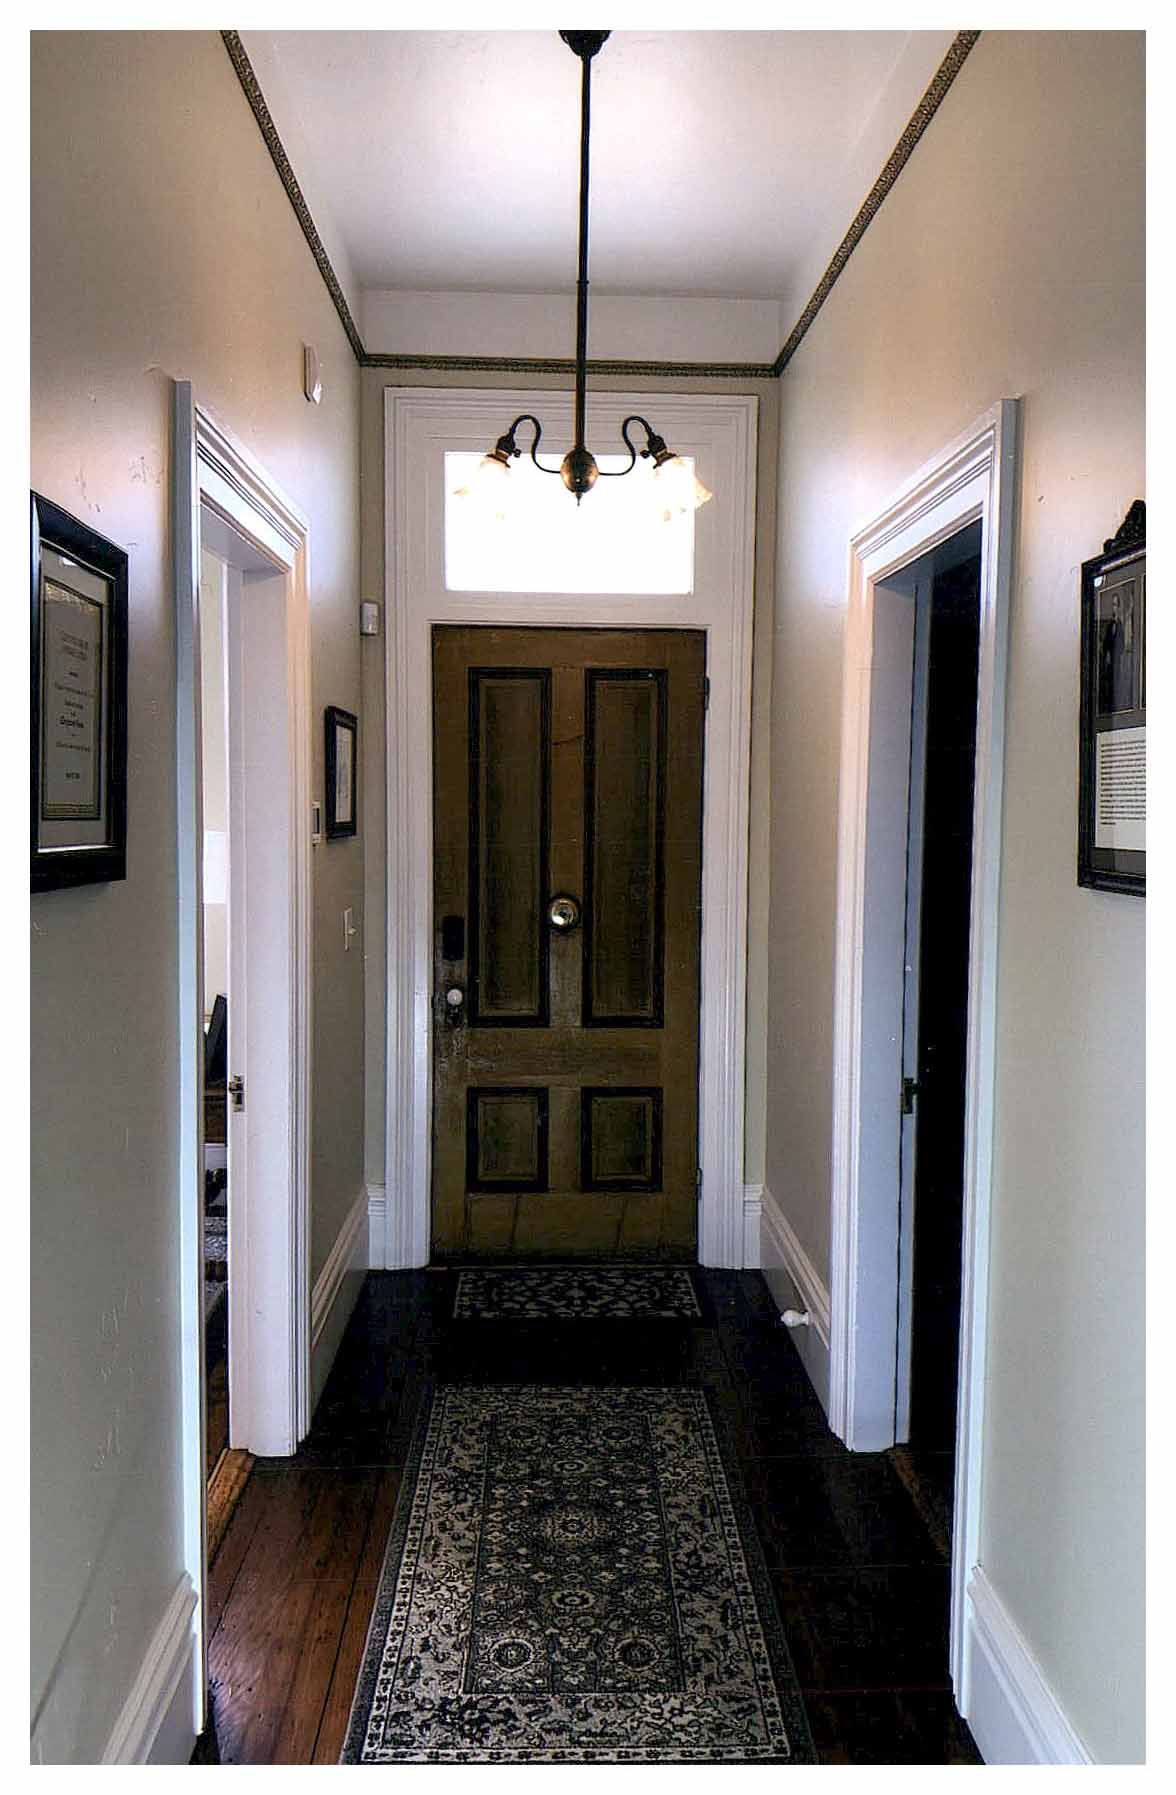 After: interior view of front entrance at end of narrow hall showing refinished wood floor and light-colored interior paint that fills the hall with light from transom.